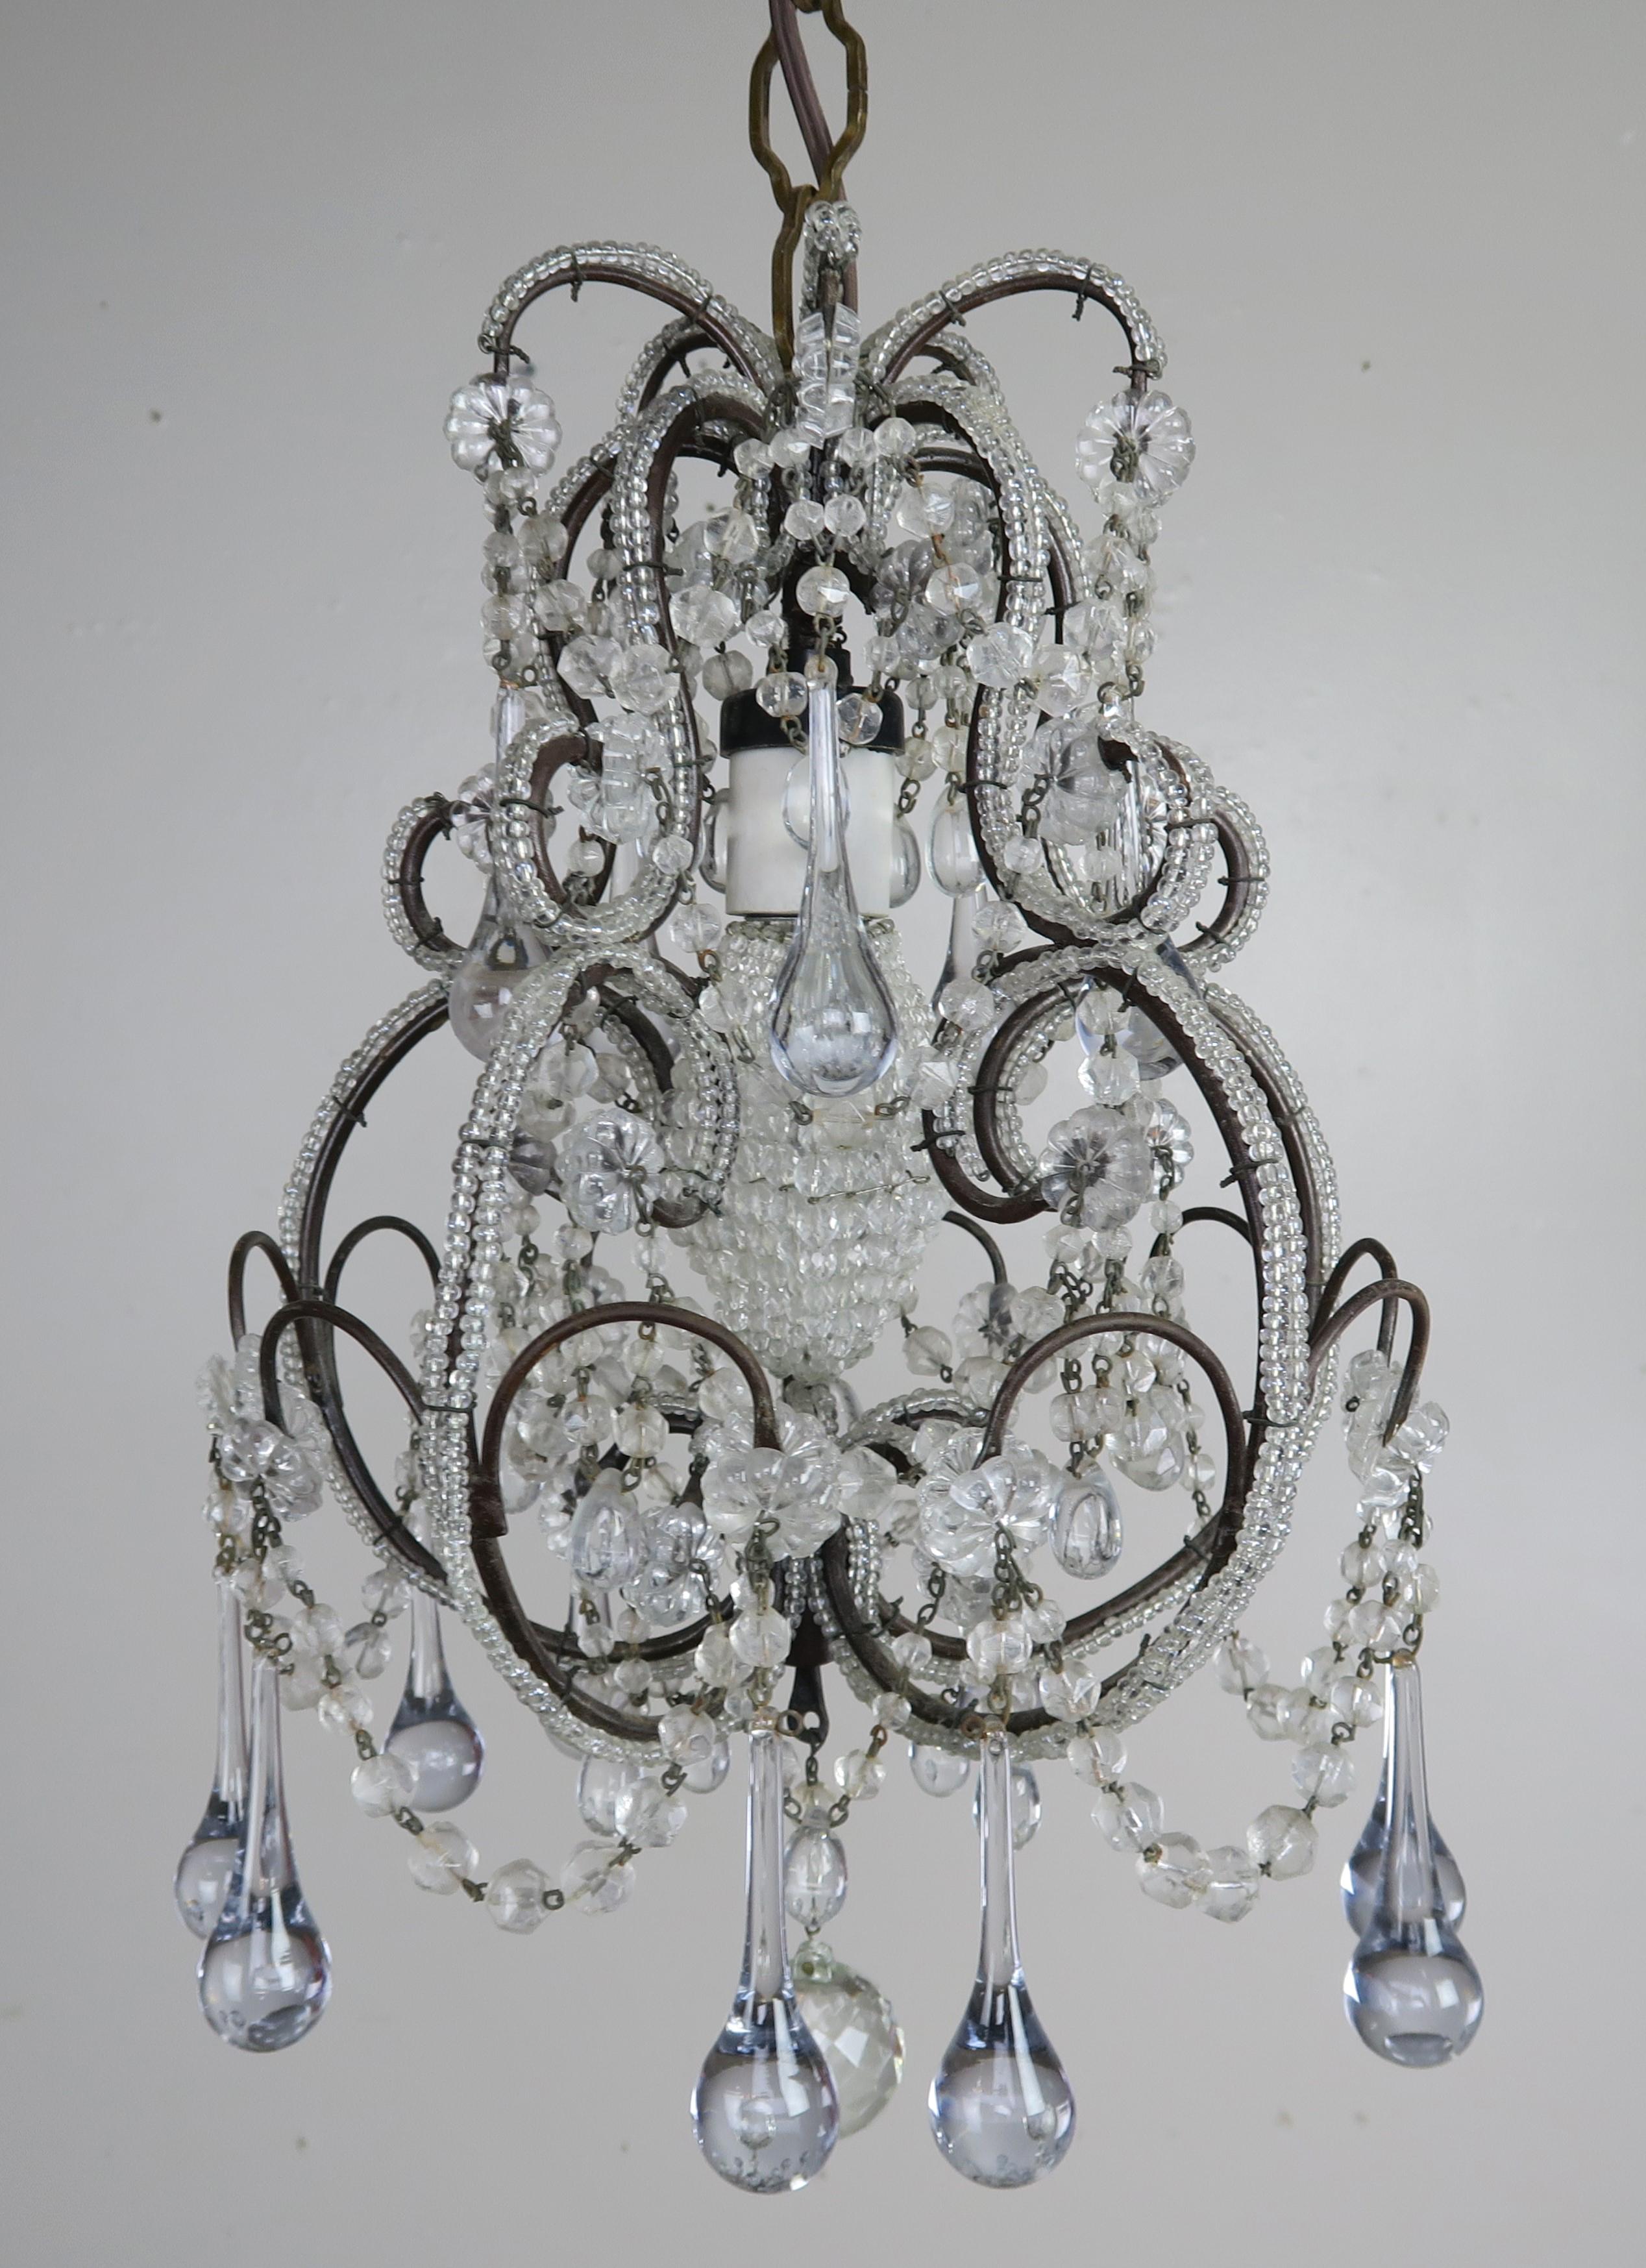 Charming French petite crystal beaded chandelier with clear crystal drops, english cut beaded garlands, and beautiful beaded frame. The fixture is newly rewired and ready to install. It includes both chain & canopy.